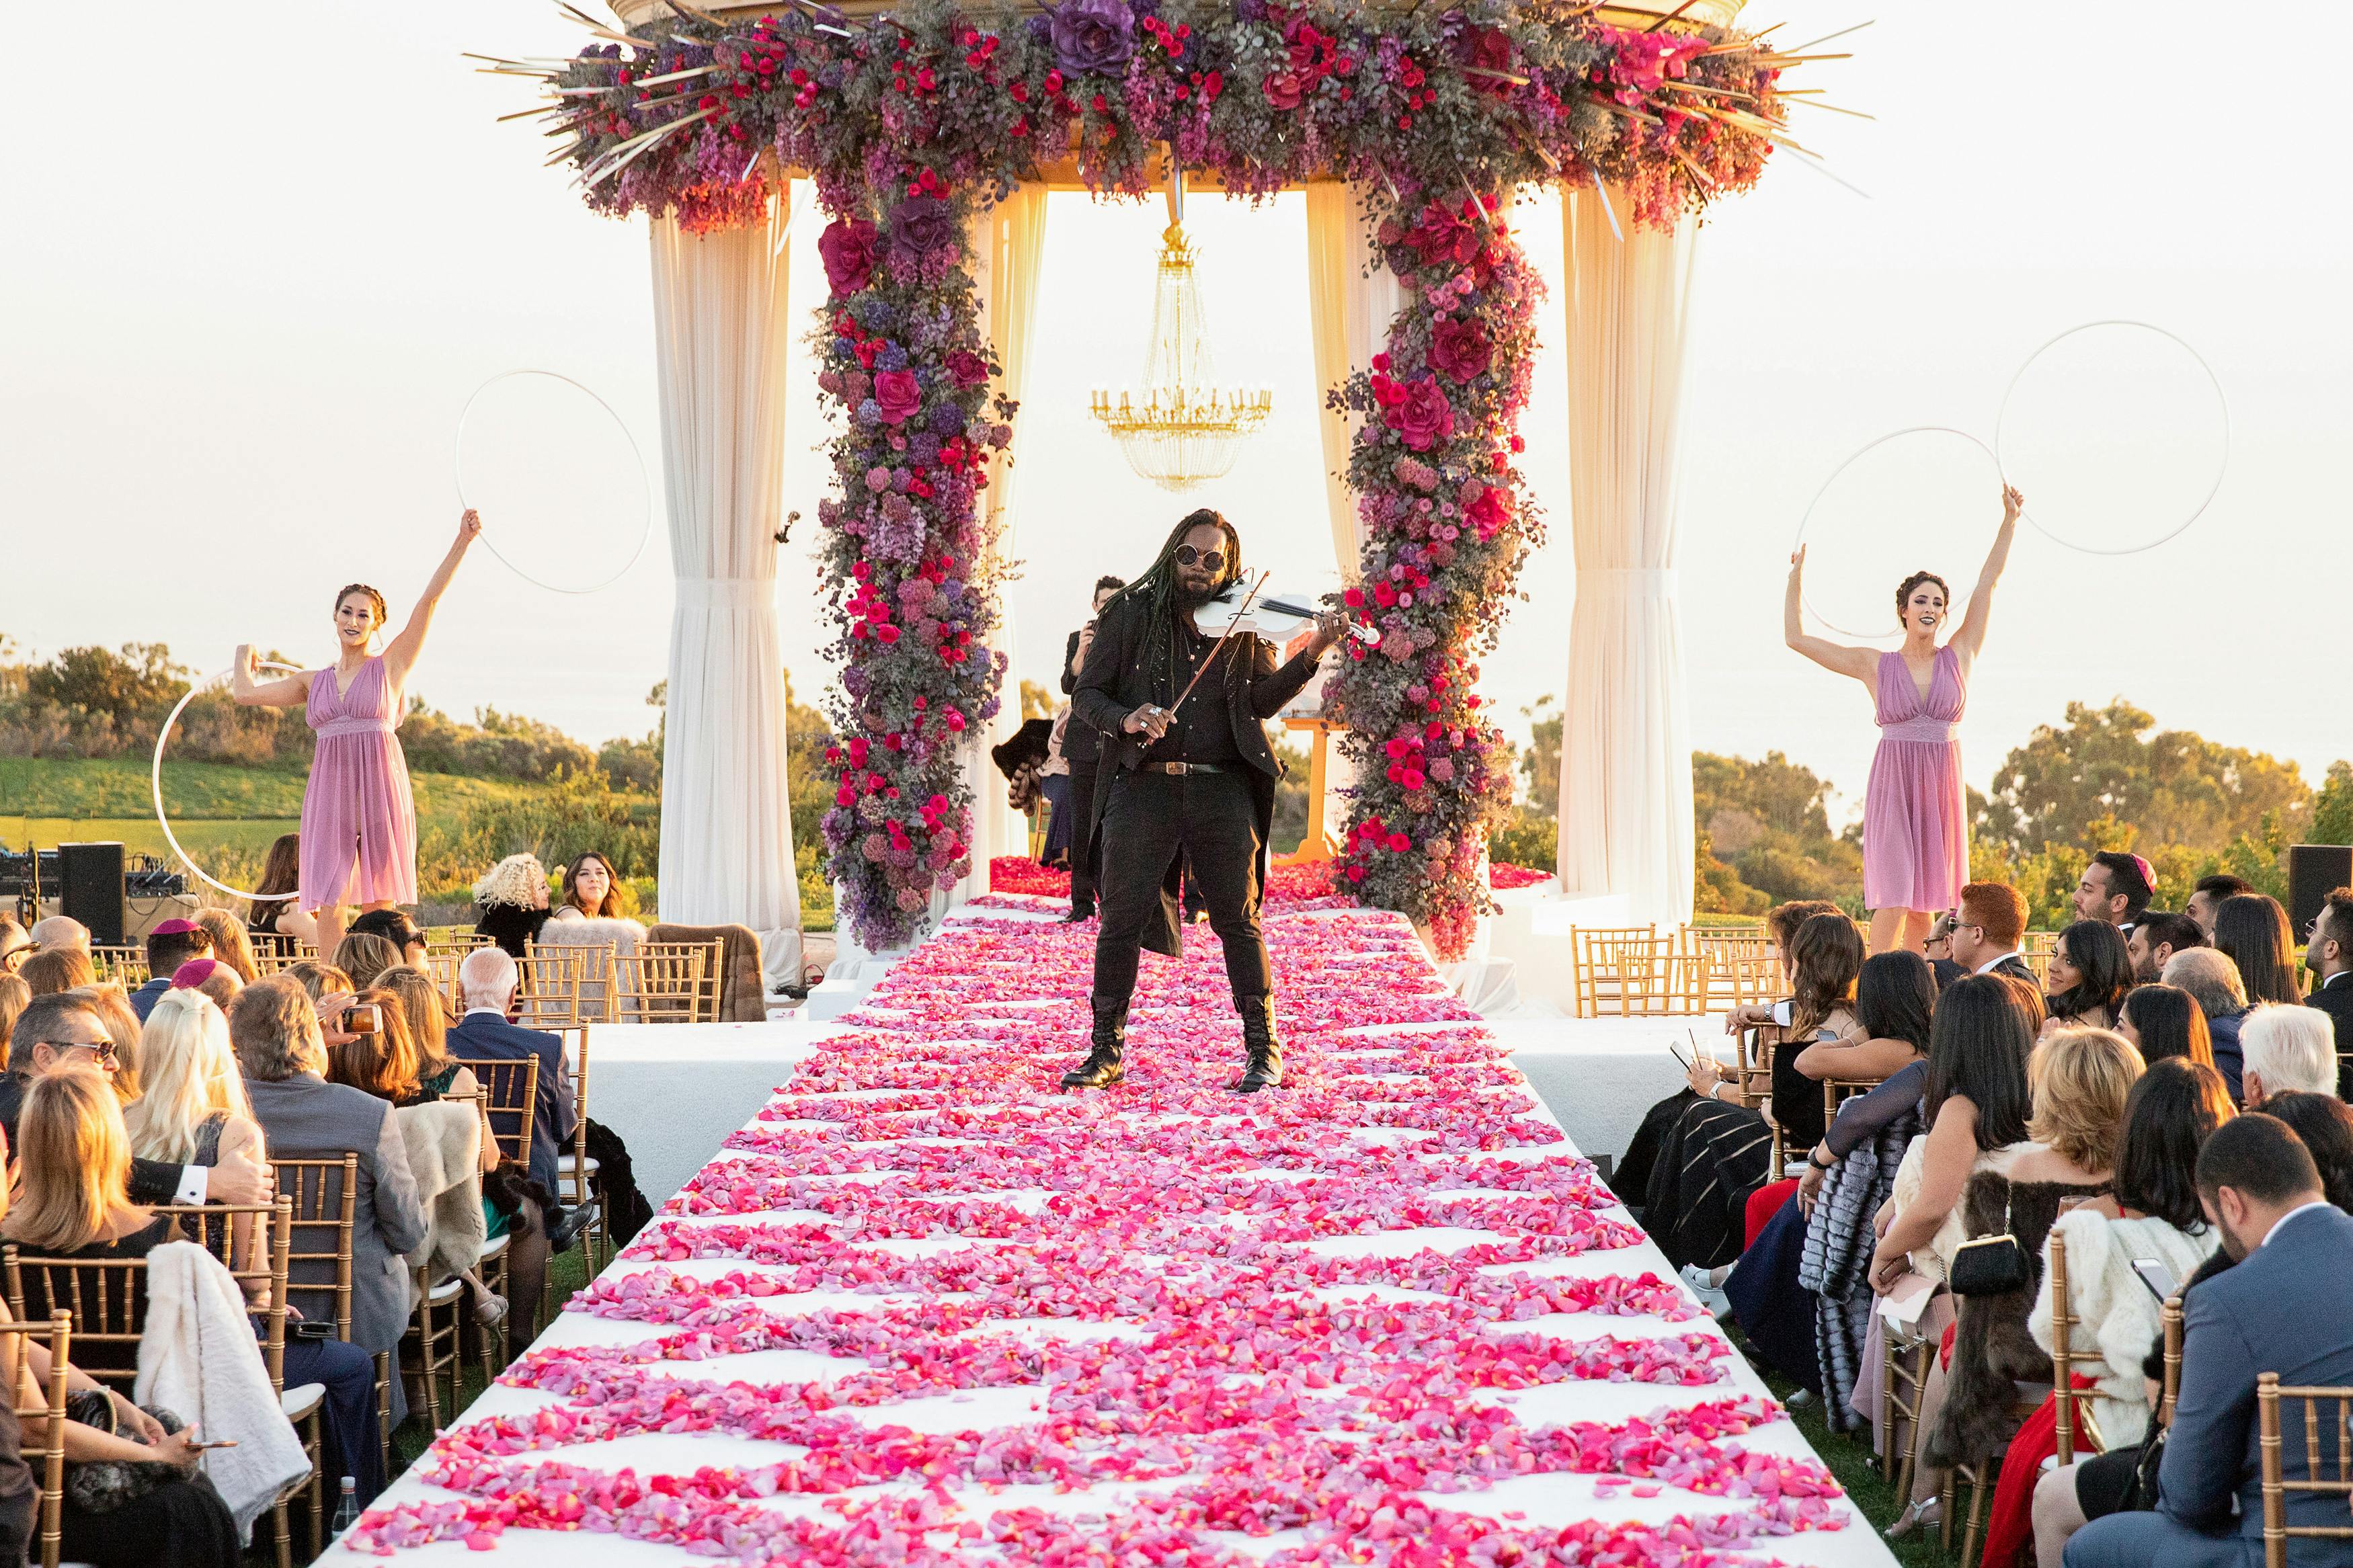 Unique Wedding Idea Where Man Plays Violin in Middle of Pink Petal-Strewn Wedding Aisle | PartySlate